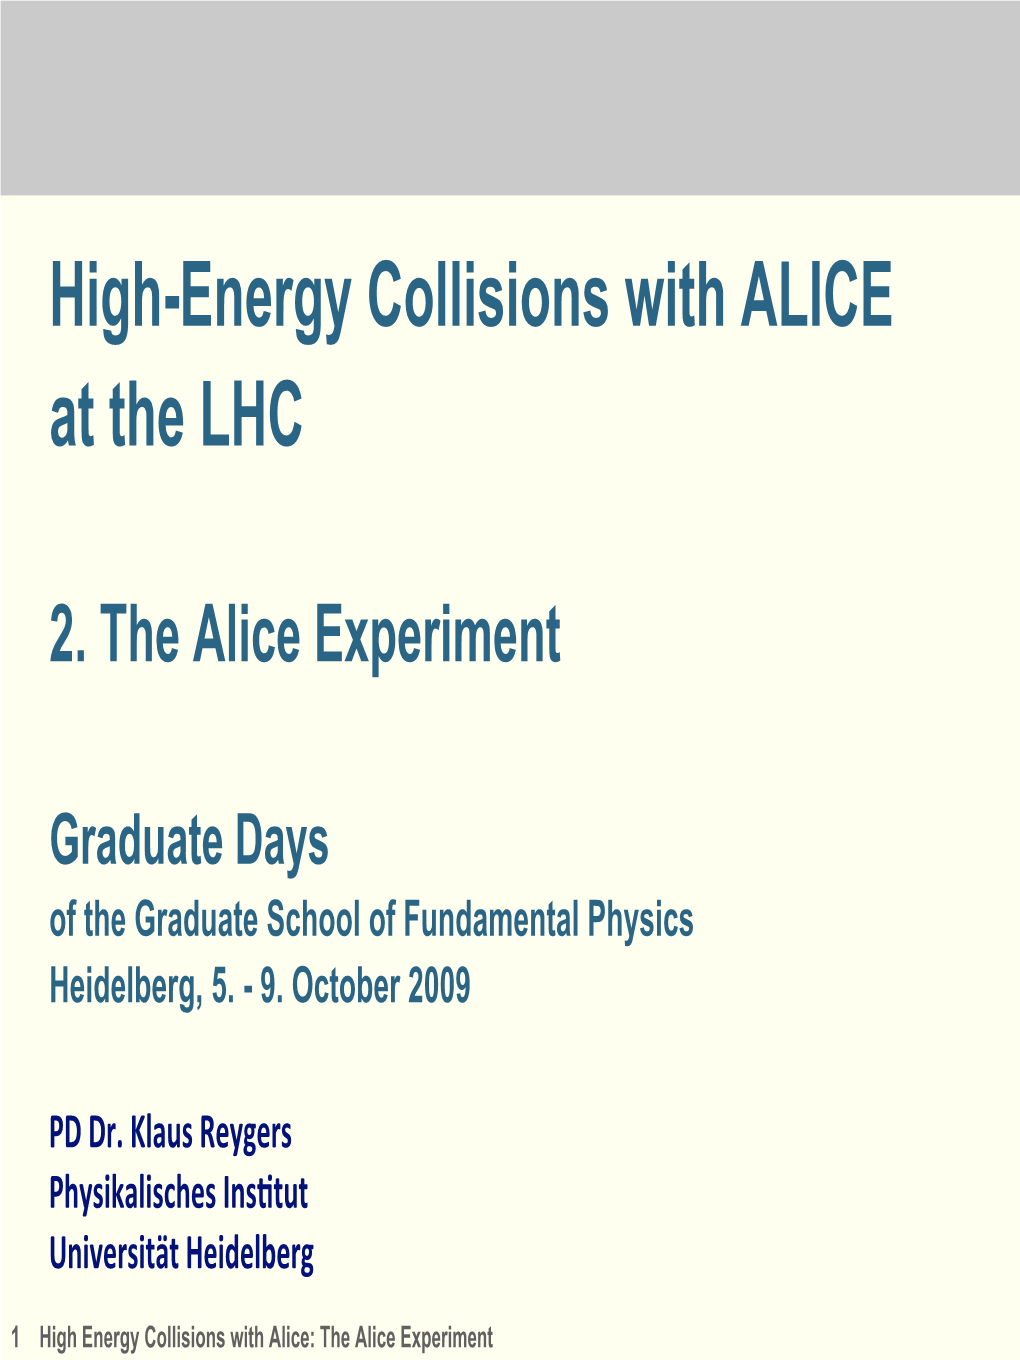 High-Energy Collisions with ALICE at the LHC